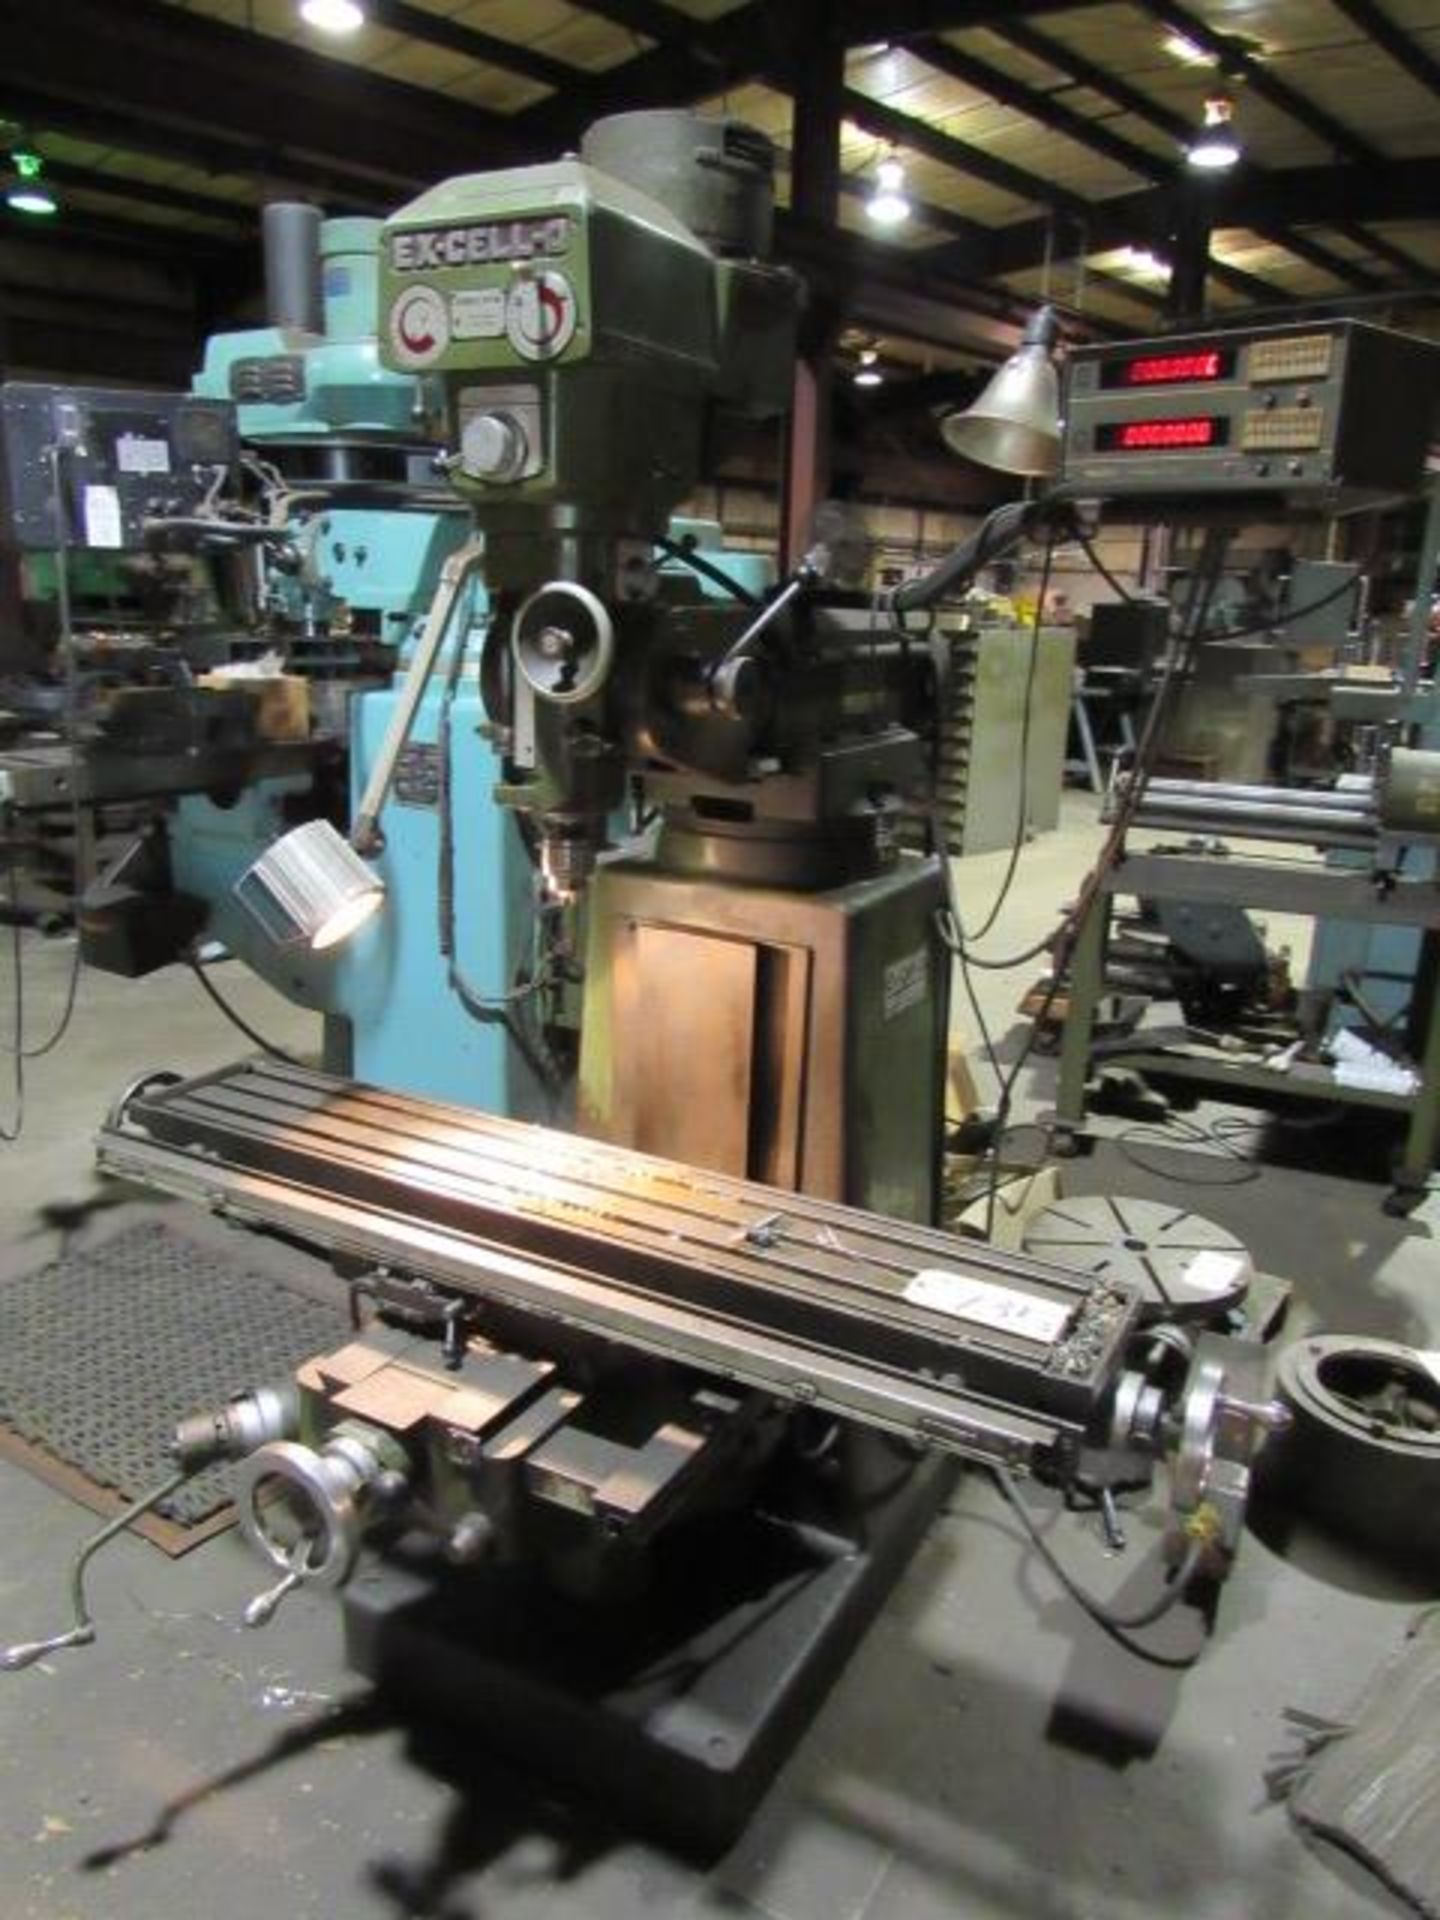 Ex-Cell-O Variable Speed Knee Mill with Power Feed Table. DRO, sn:6028222 - Bild 6 aus 8